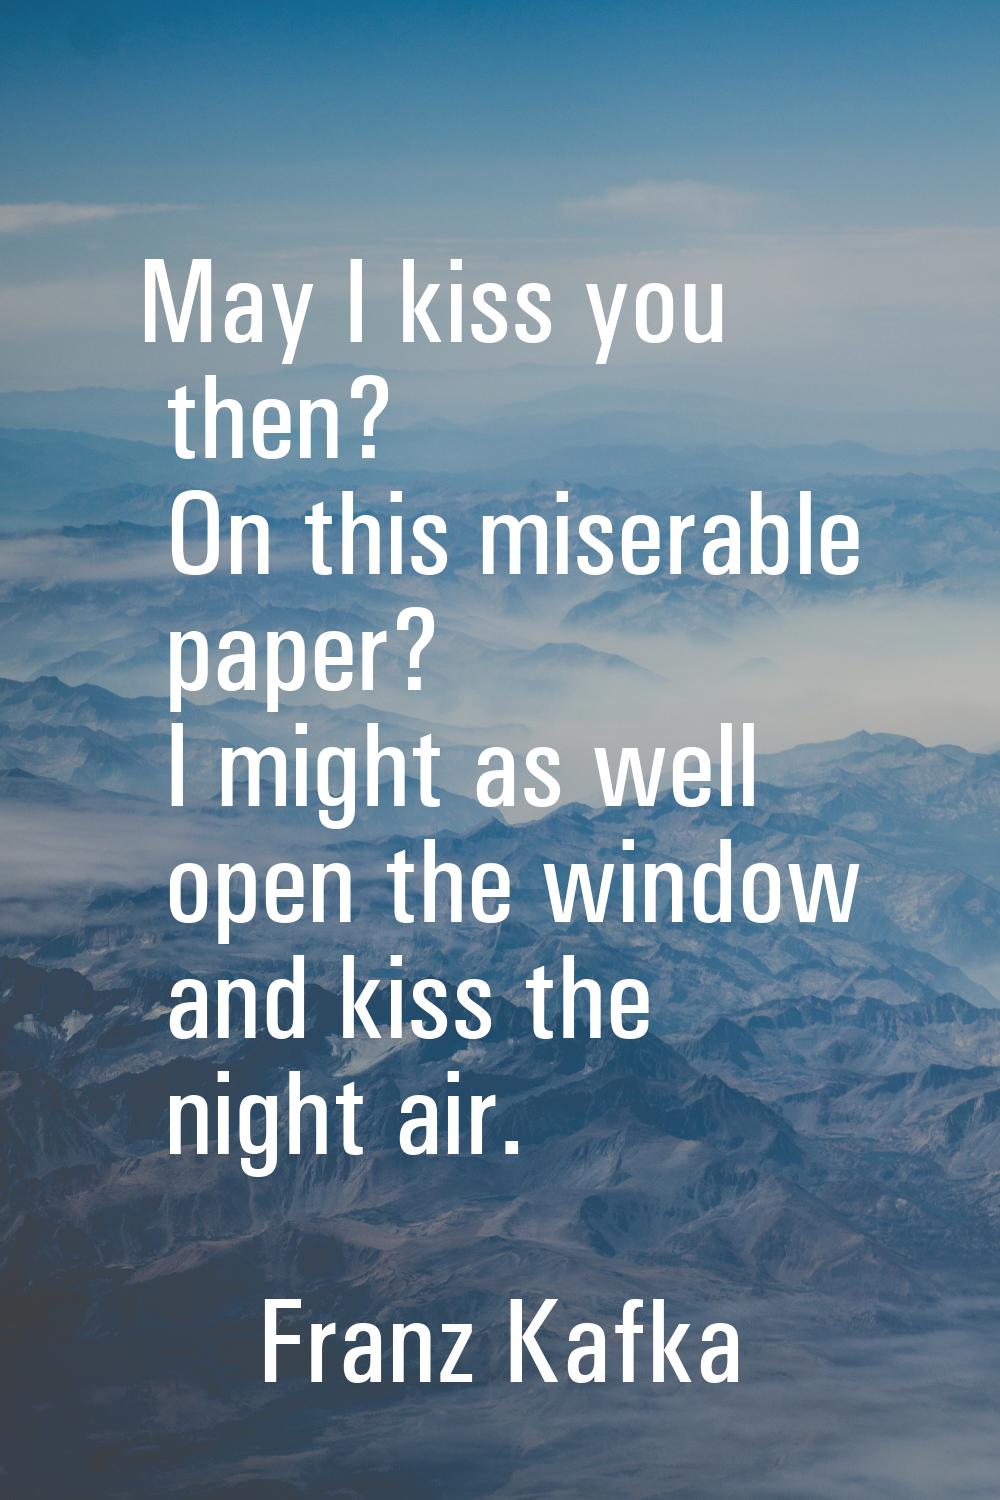 May I kiss you then? On this miserable paper? I might as well open the window and kiss the night ai